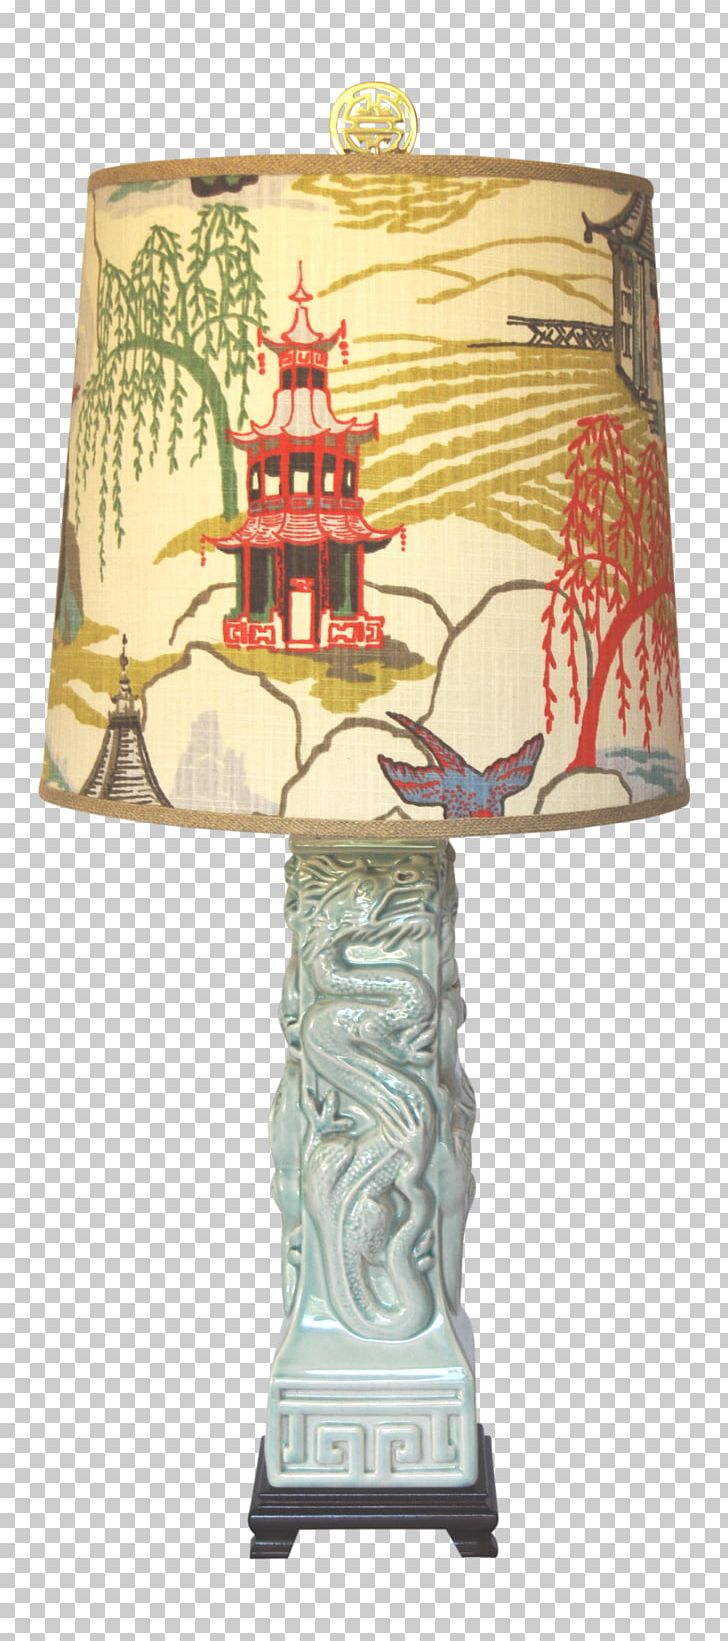 Lamp Shades Celadon Ceramic Chinoiserie PNG, Clipart, Celadon, Ceramic, Chairish, Chinoiserie, Color Free PNG Download